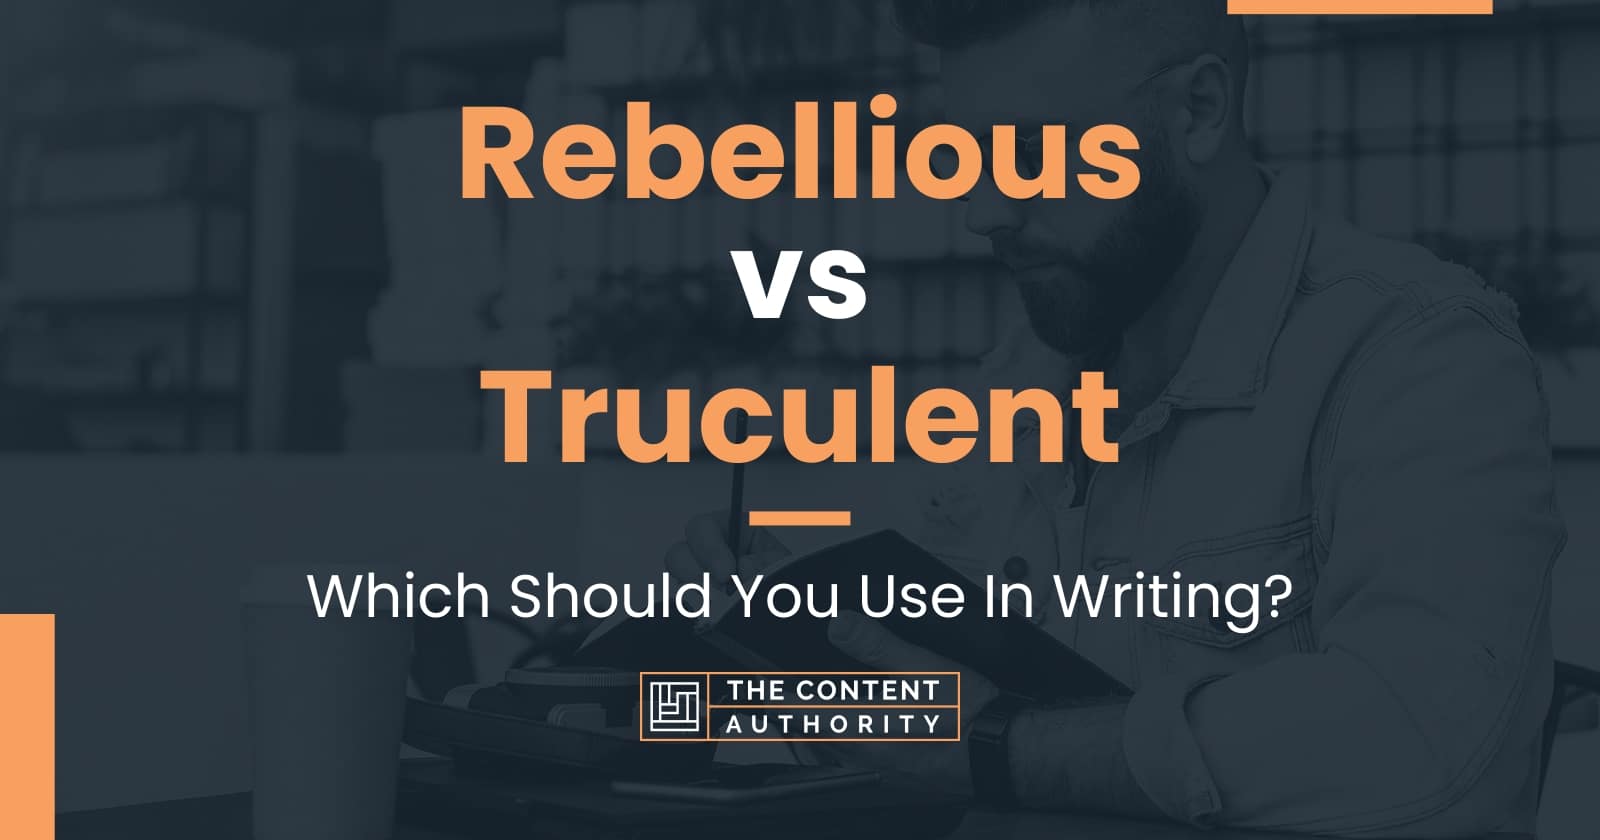 Rebellious vs Truculent: Which Should You Use In Writing?